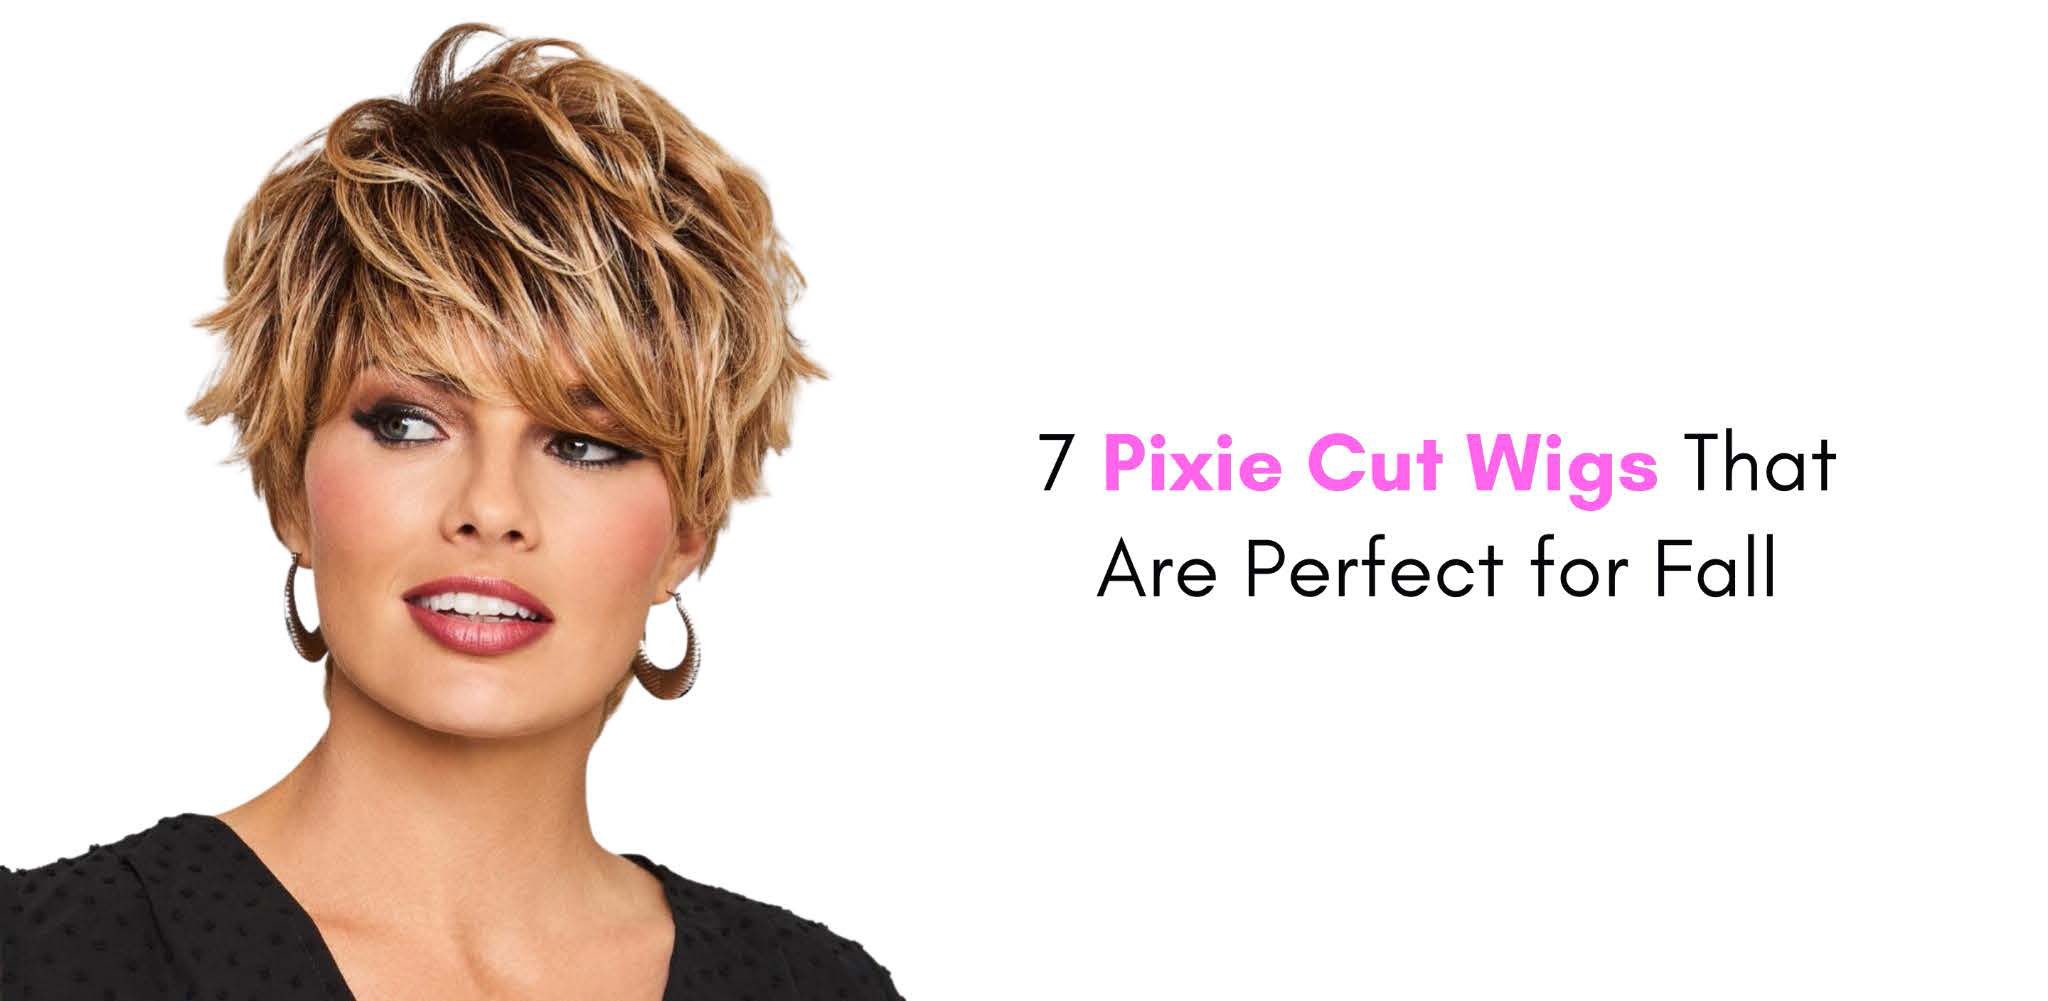 7 Pixie Cut Wigs That Are Perfect For Fall